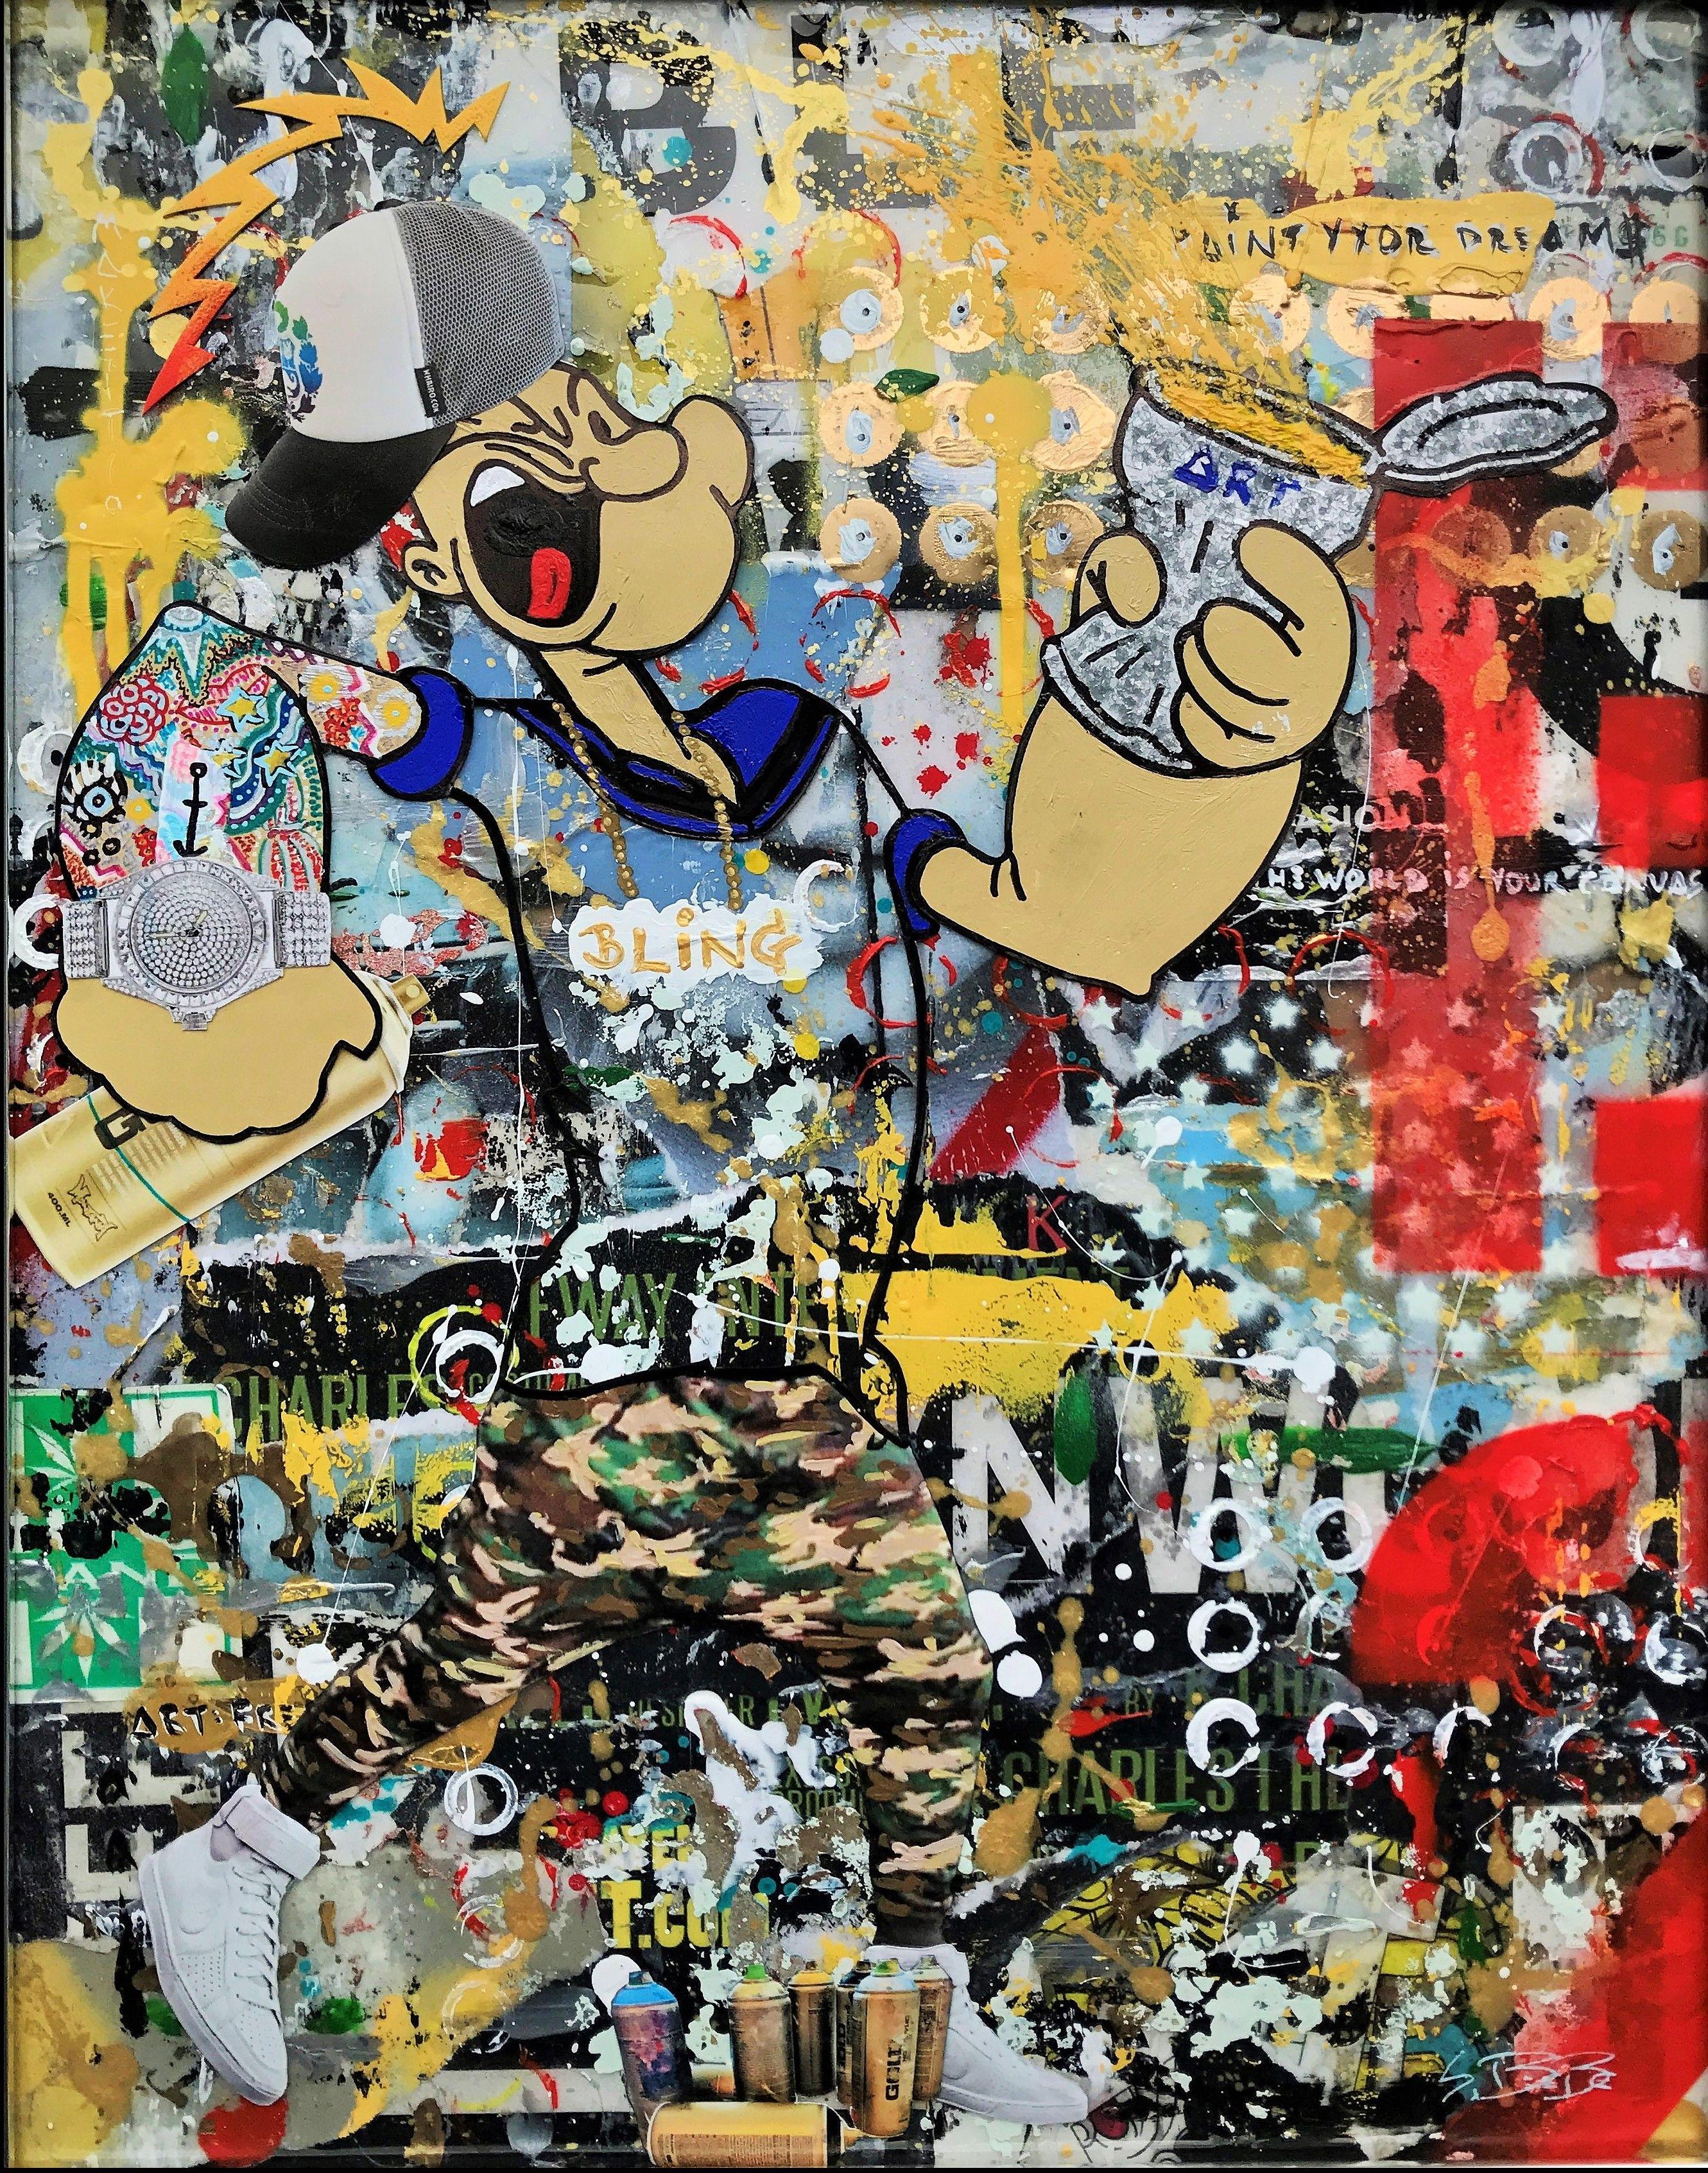 Paint the Wallz - Wynwood Series, Mixed Media on Other - Mixed Media Art by Greg Beebe